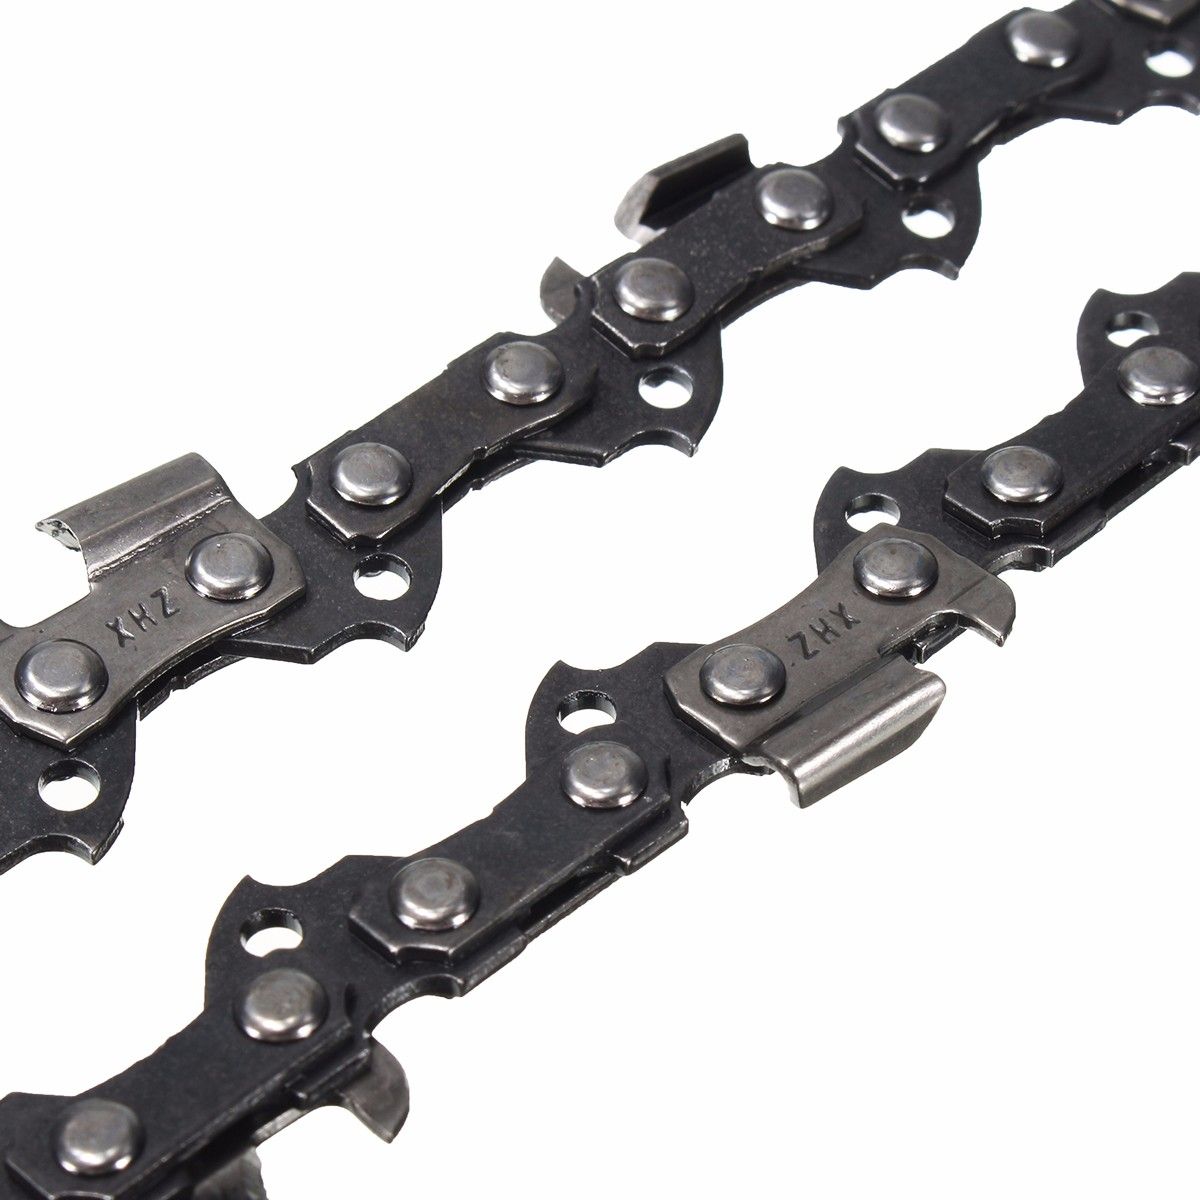 12-Inch-44-Drive-Links-Substitution-Chain-Saw-Saw-Mill-Chain-38-Inch-Pitch-050-Gauge-1111524